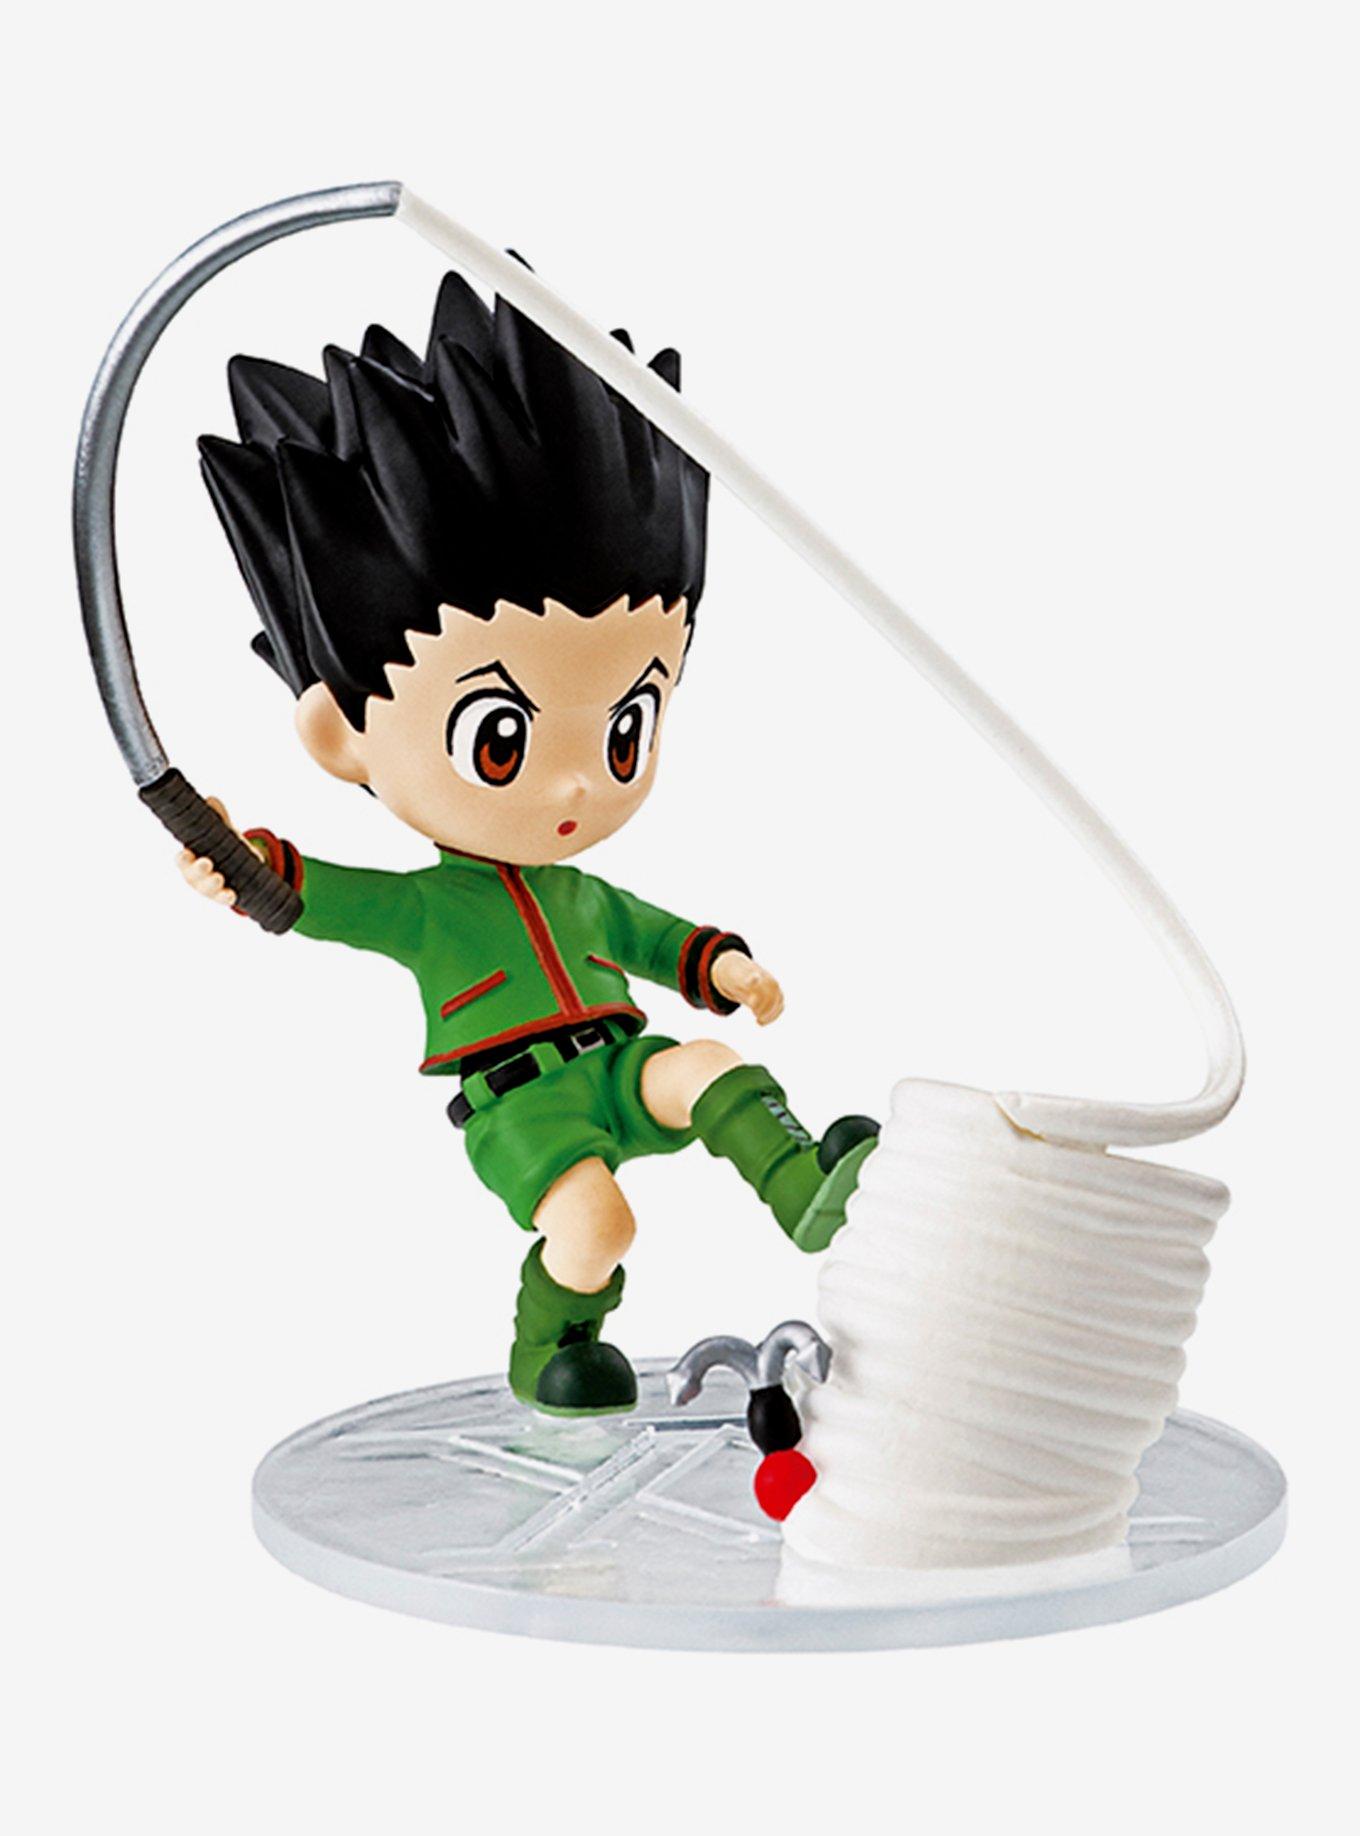 HUNTER x HUNTER DesQ DESKTOP HUNTER] HUNTER x HUNTER characters are now  available as convenient figures! Scheduled to be released on August 30th.  All 6 types. 1100 yen ($9 USD excluding tax)